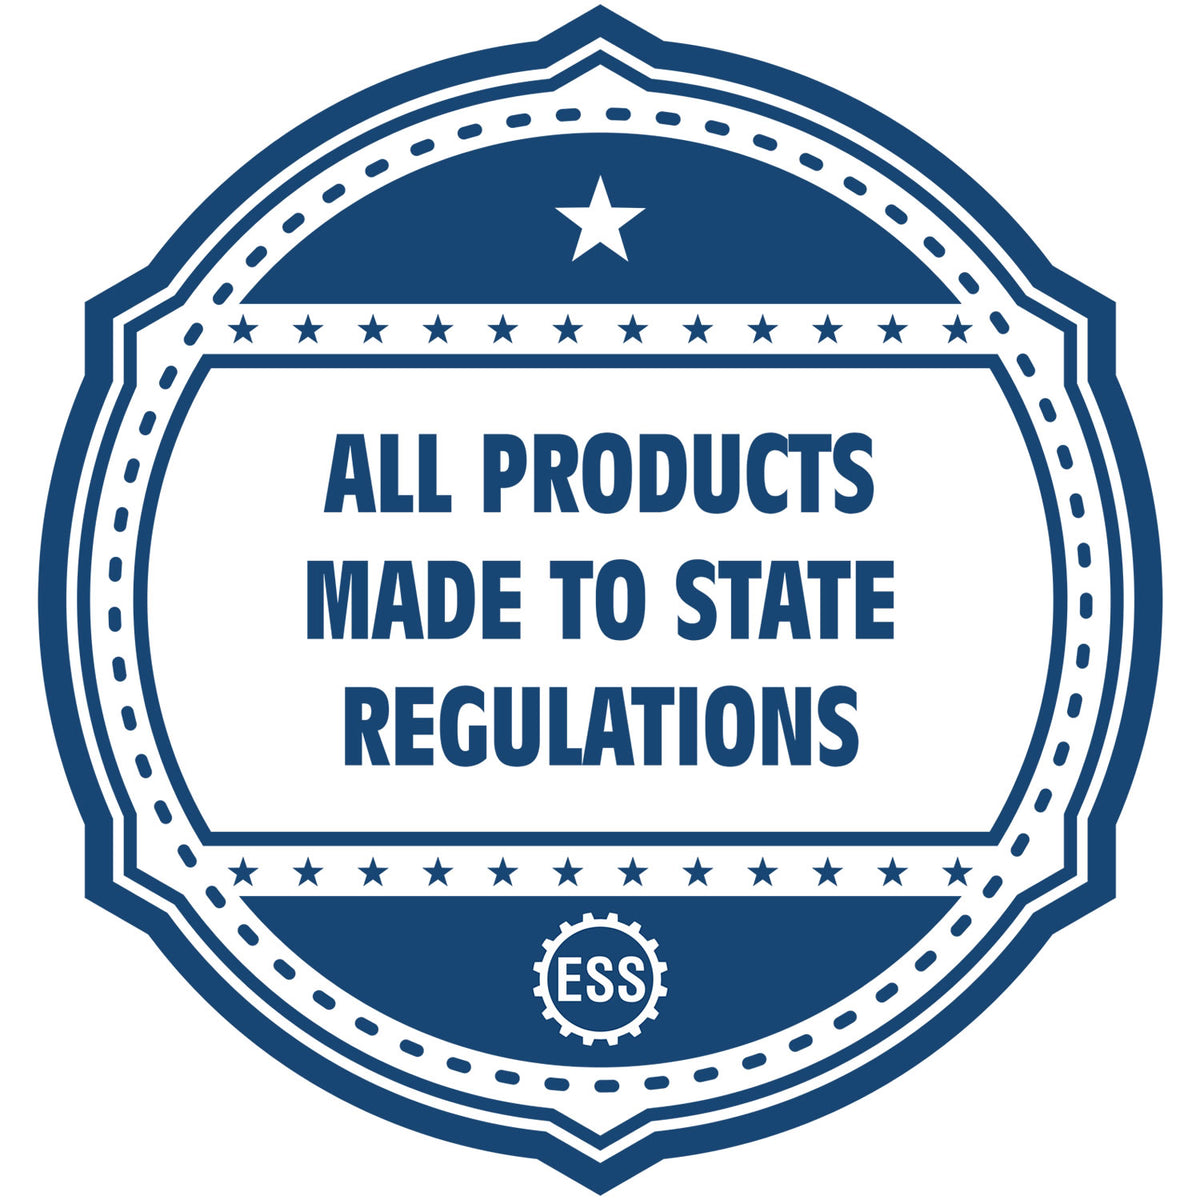 An icon or badge element for the District of Columbia Long Reach Architectural Embossing Seal showing that this product is made in compliance with state regulations.